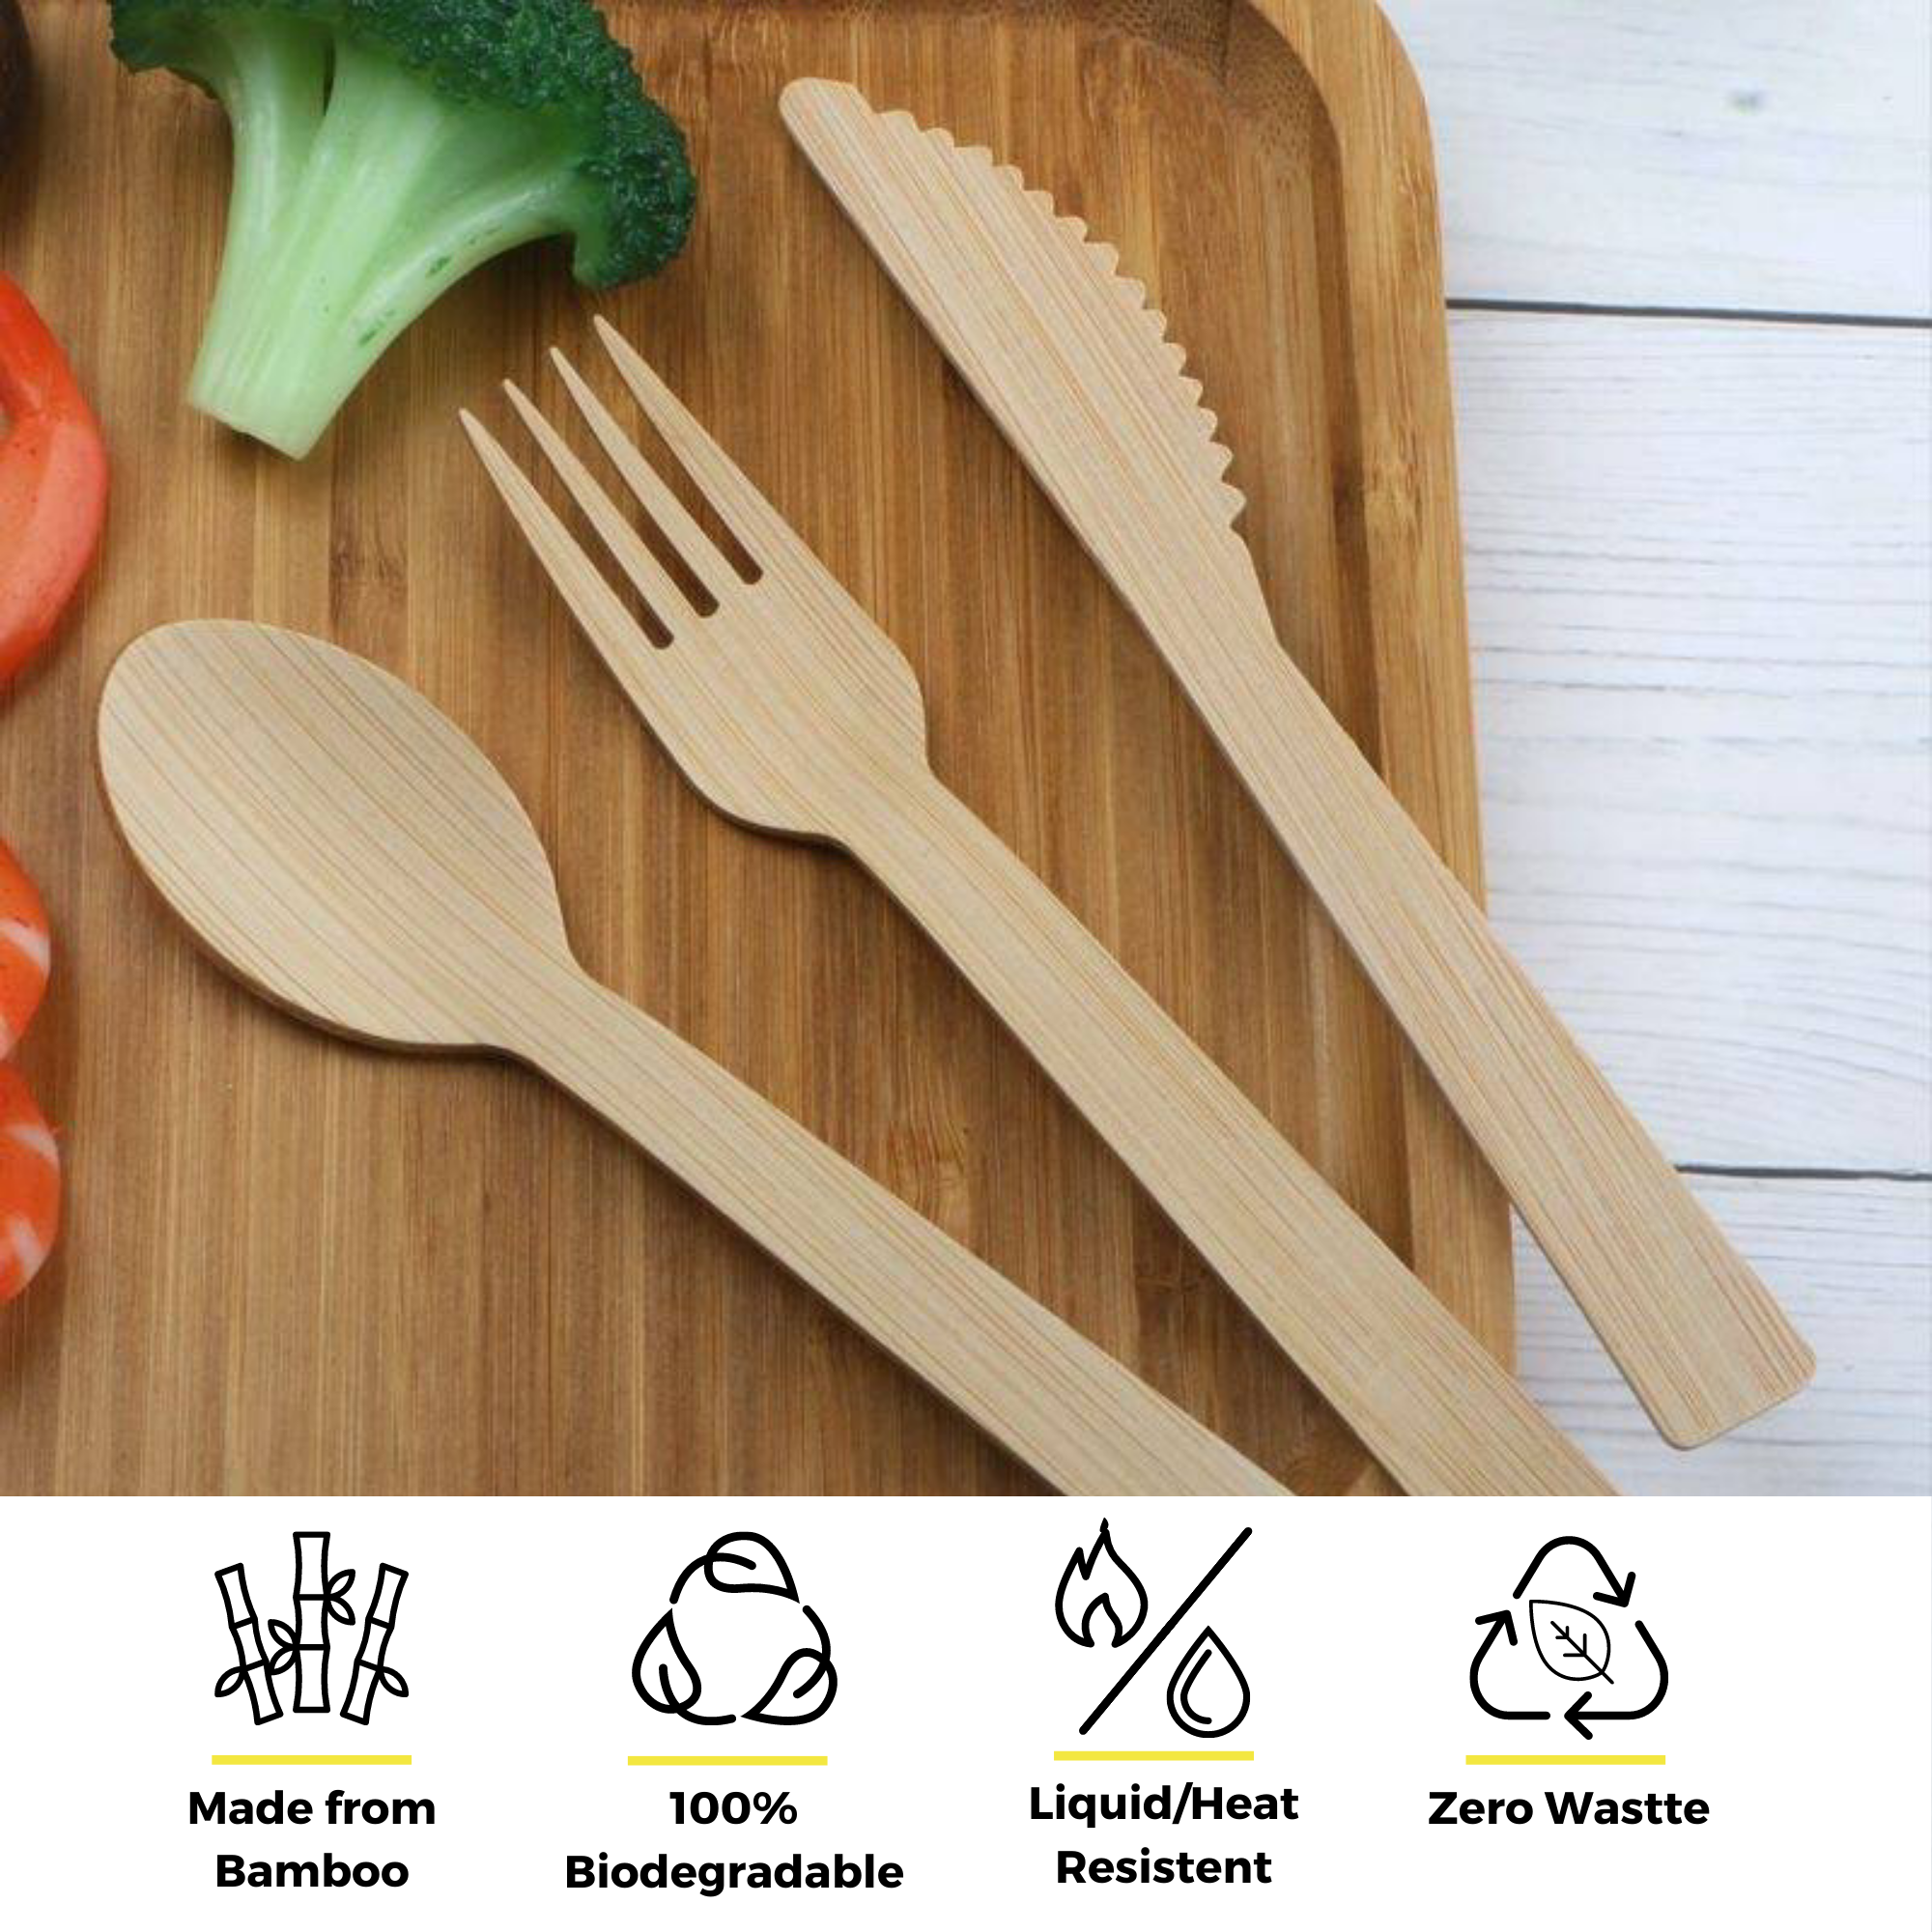 An elegant bamboo cutlery set by Holy City Straw Co., arranged on a wooden cutting board next to slices of fresh tomato and broccoli. Accompanying eco-friendly icons highlight the utensils' features: made from bamboo, 100% biodegradable, liquid/heat resistant, and zero waste.